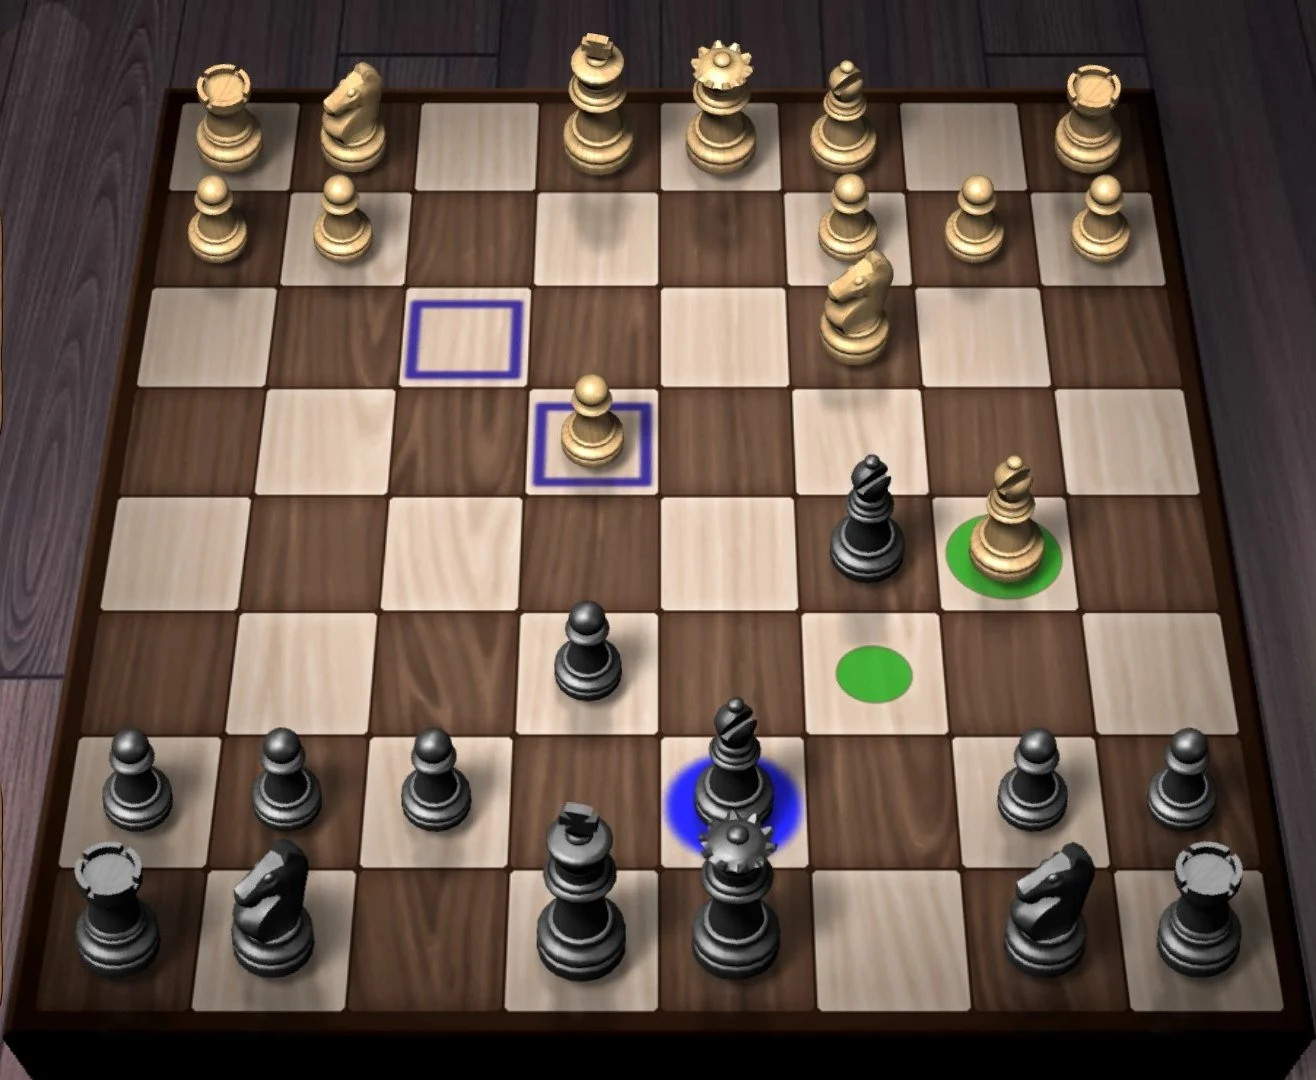 Chess bomB APK (Android Game) - Free Download